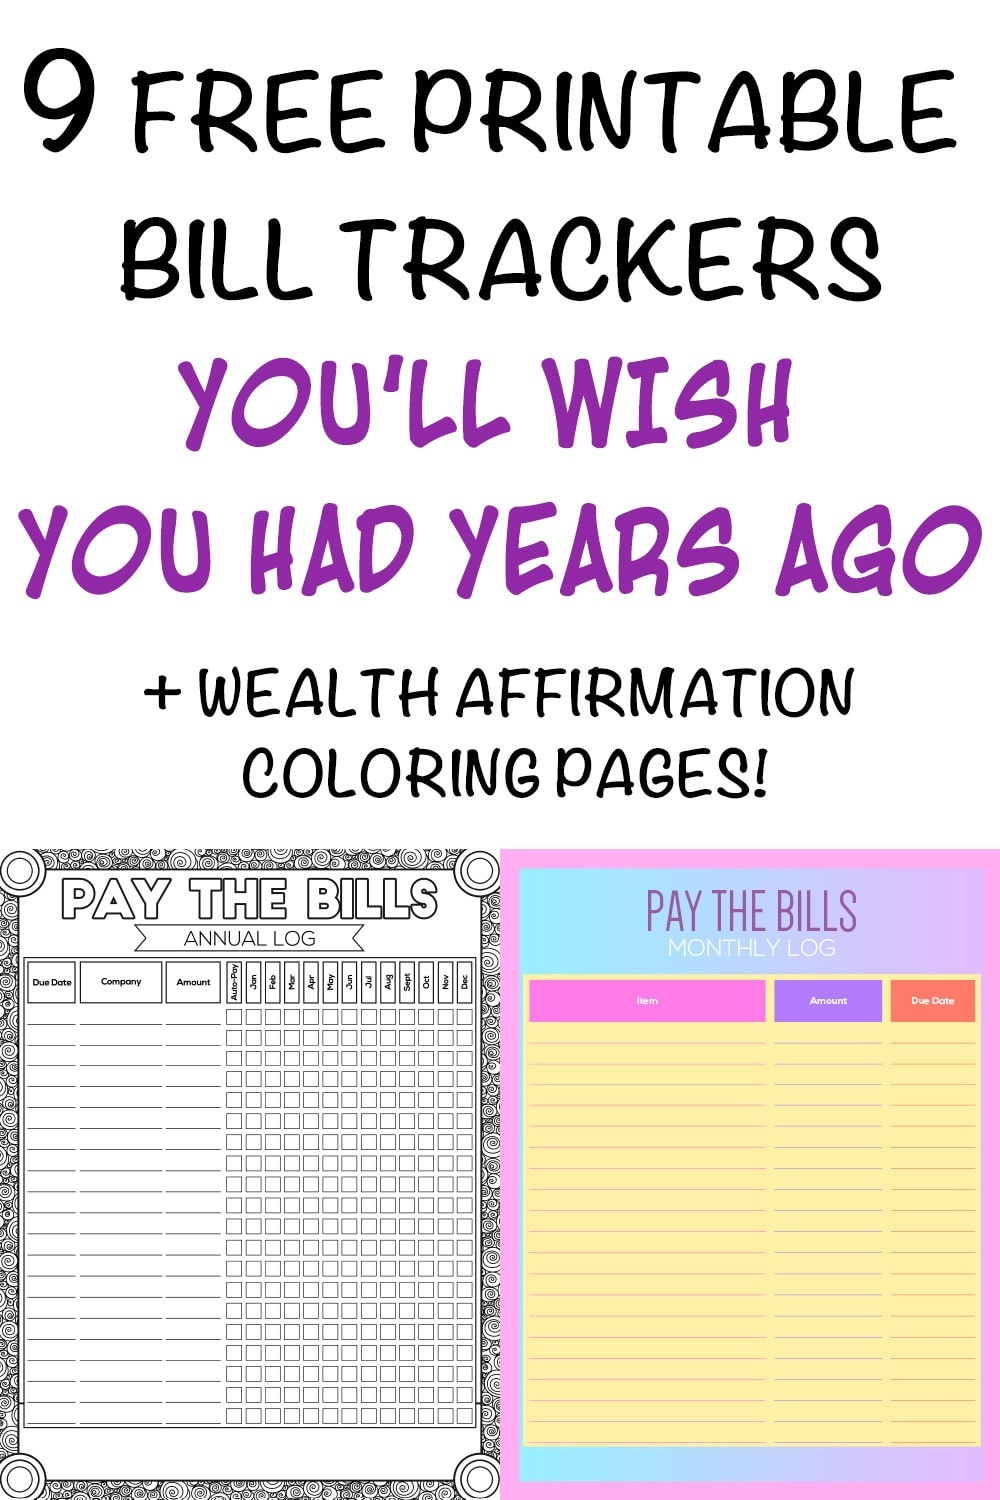 9 Printable Bill Payment Checklists And Bill Trackers - The Artisan Life - Free Printable Bill Payment Checklist